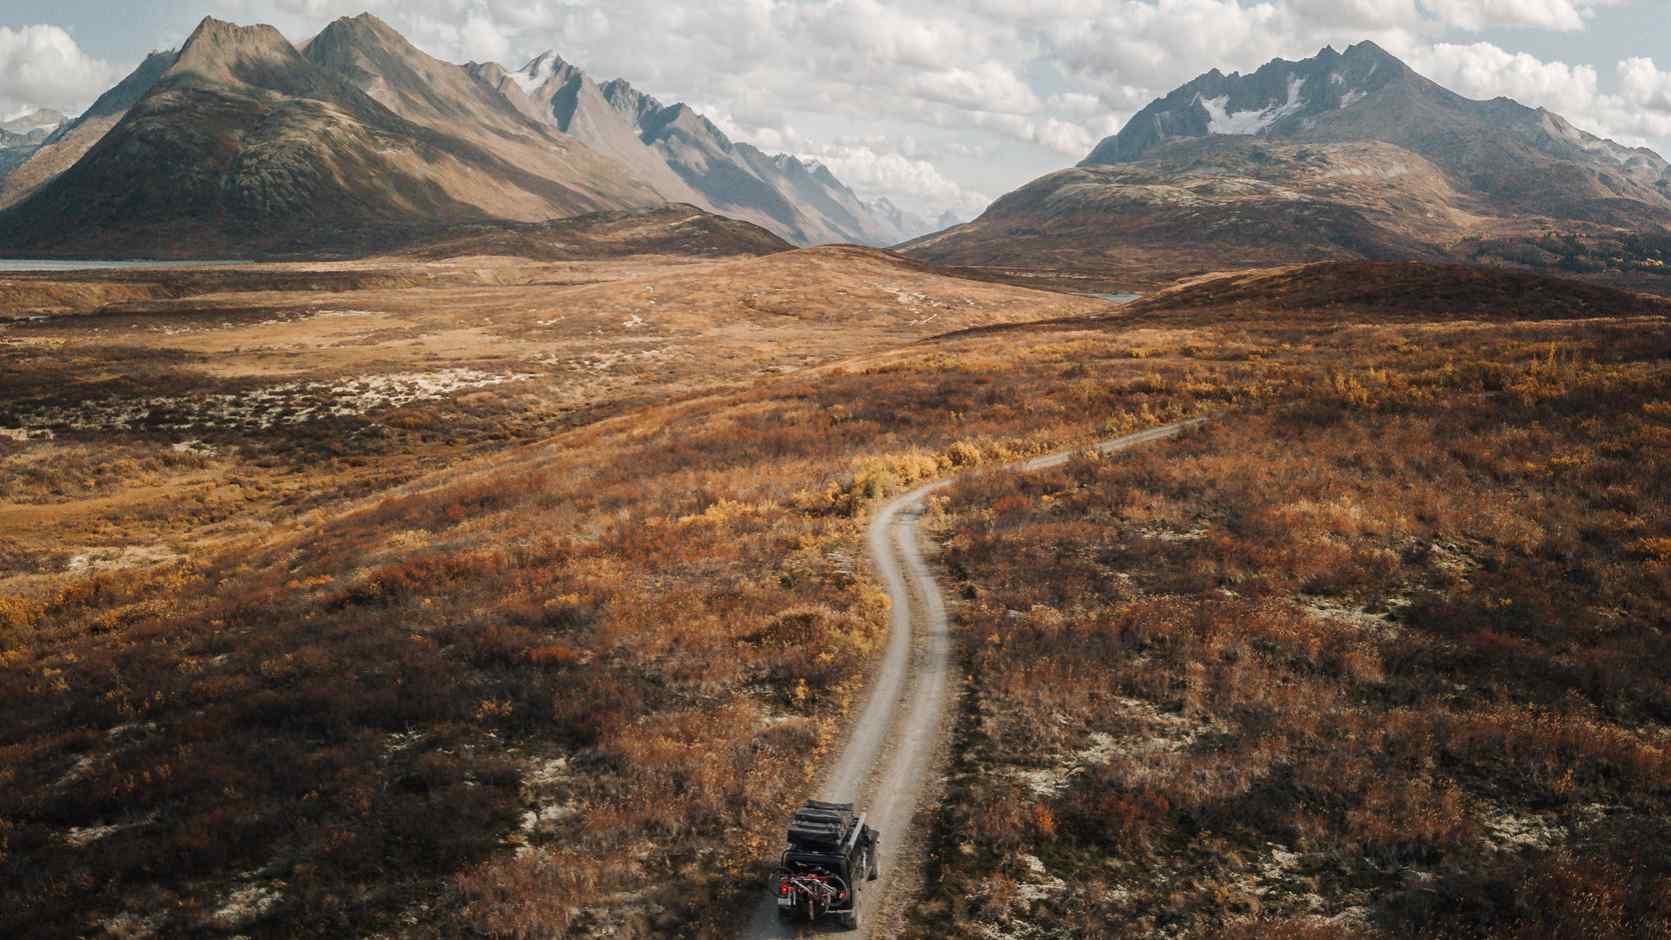 After the gold rush: a 4x4 adventure in the Yukon